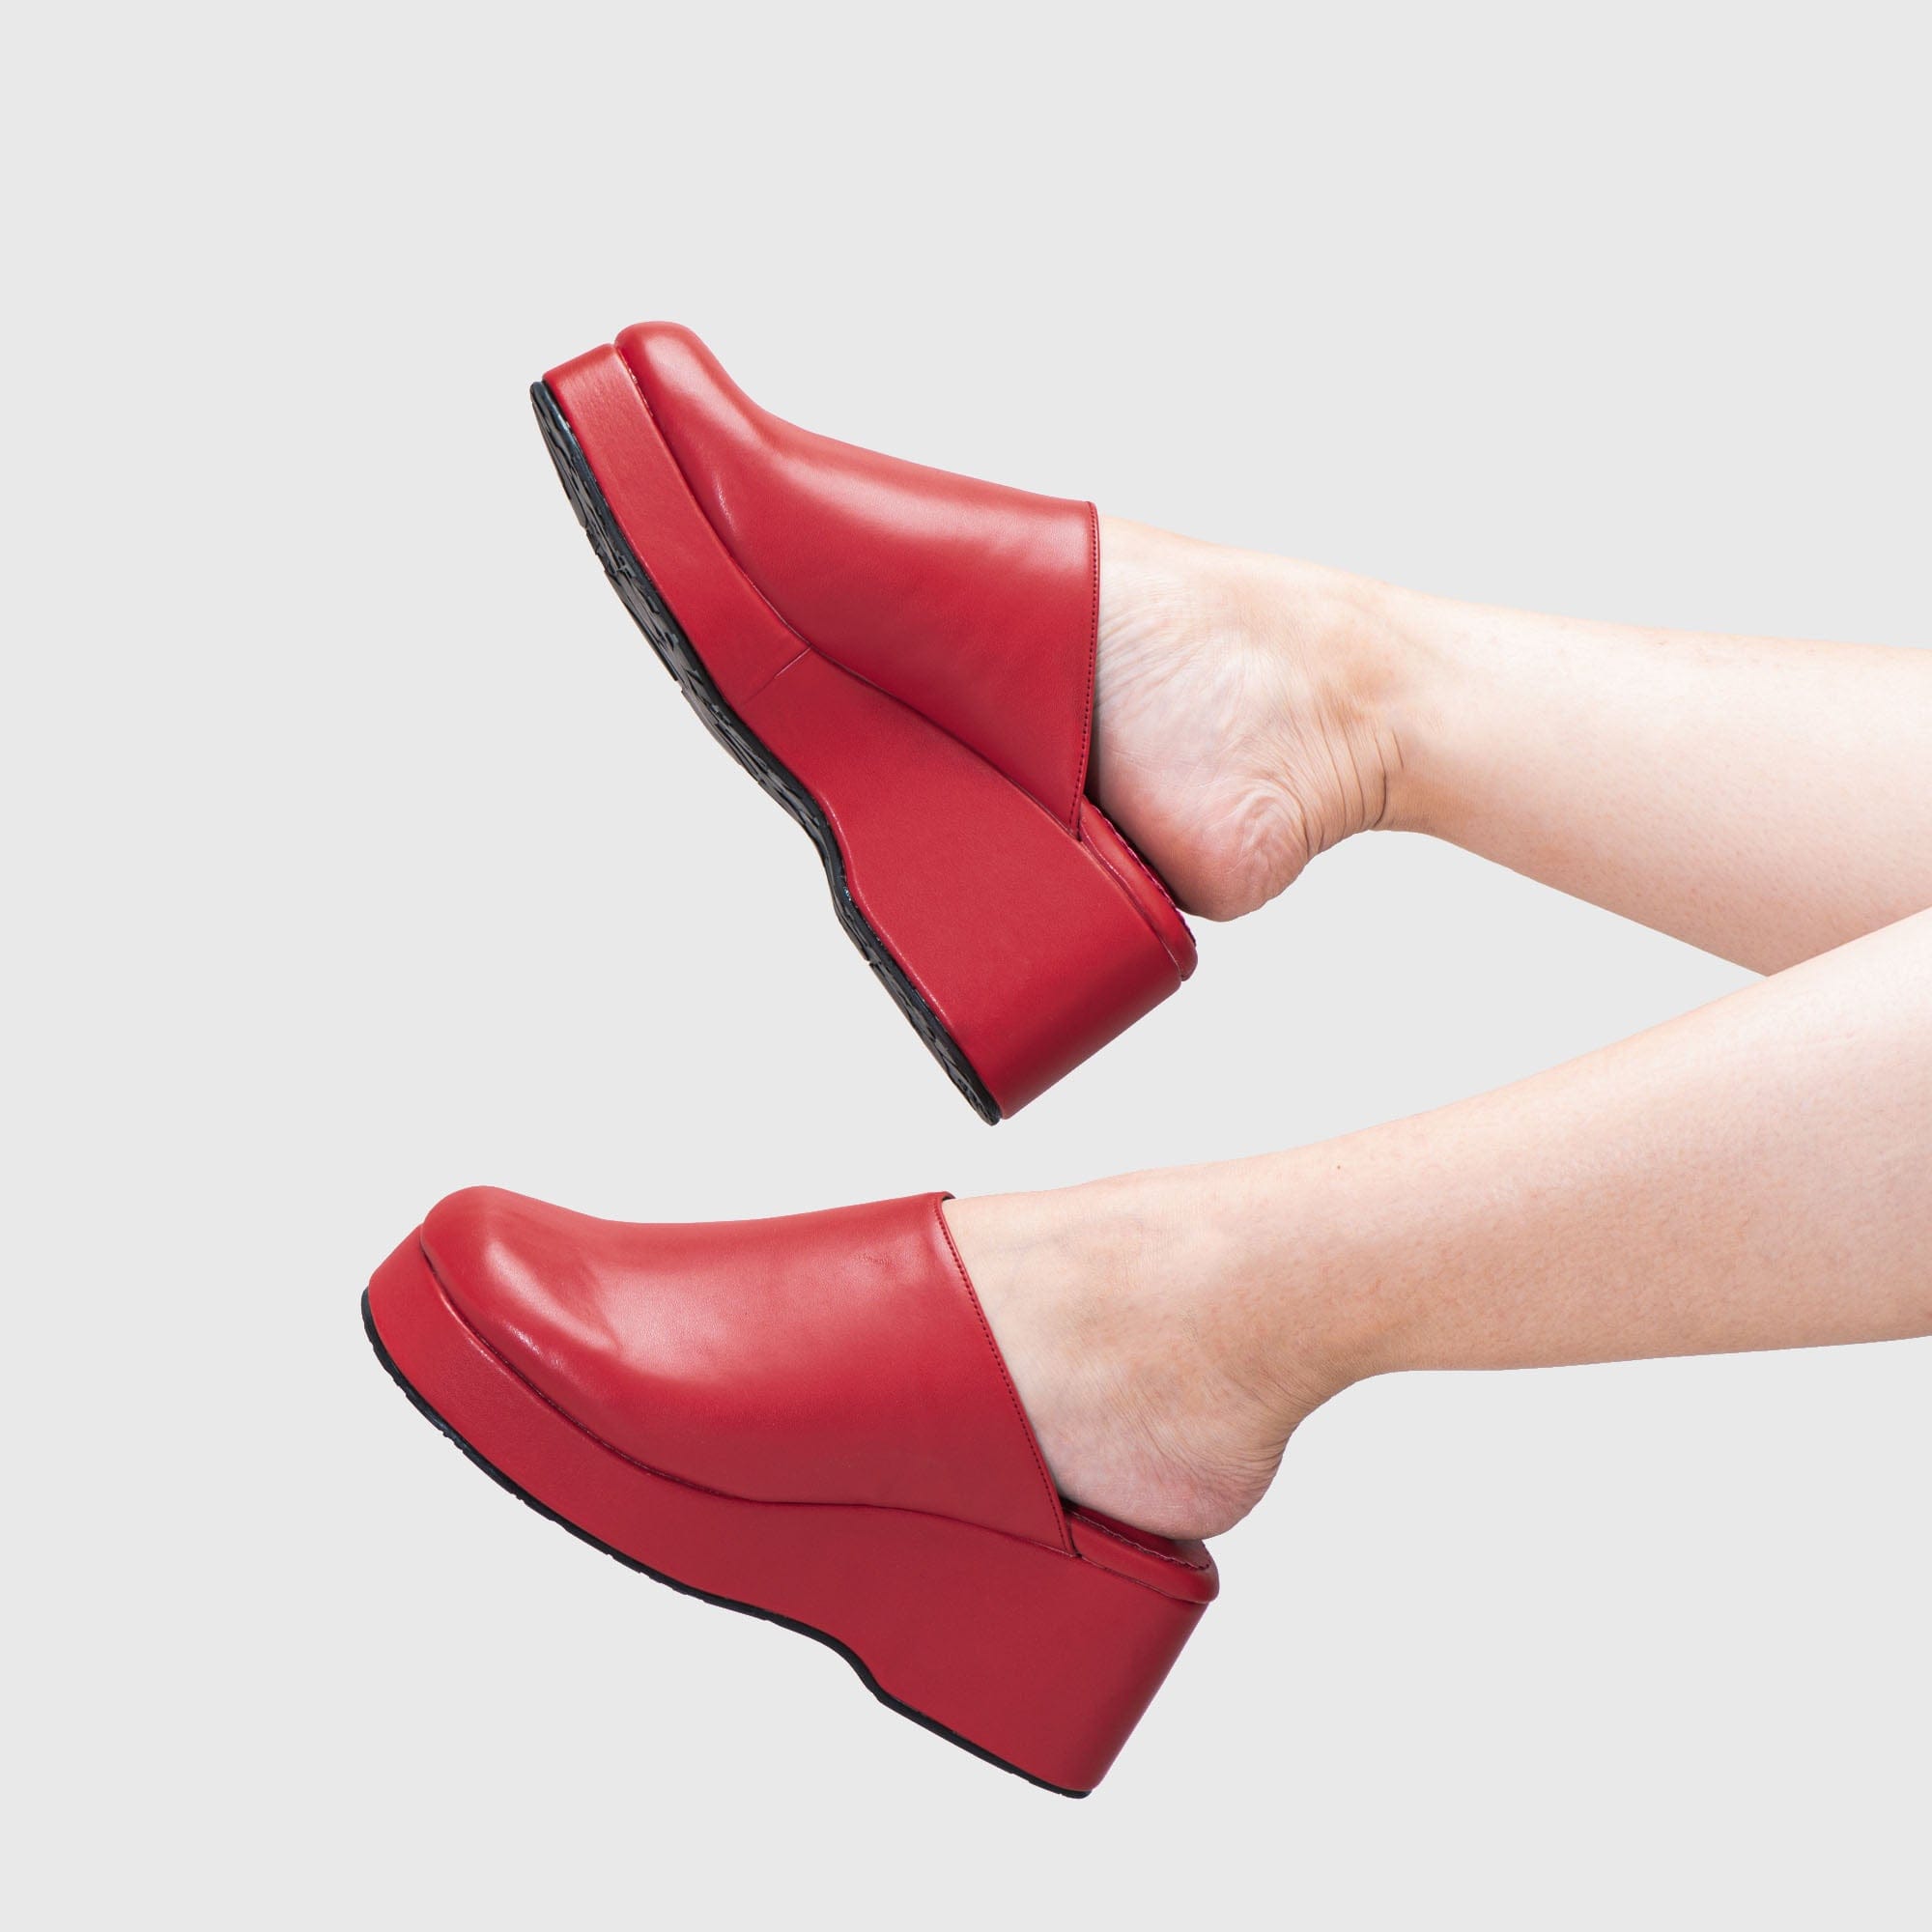 Adorable Projects Official Adorableprojects - Jessie Platform Red - Sandal Wanita